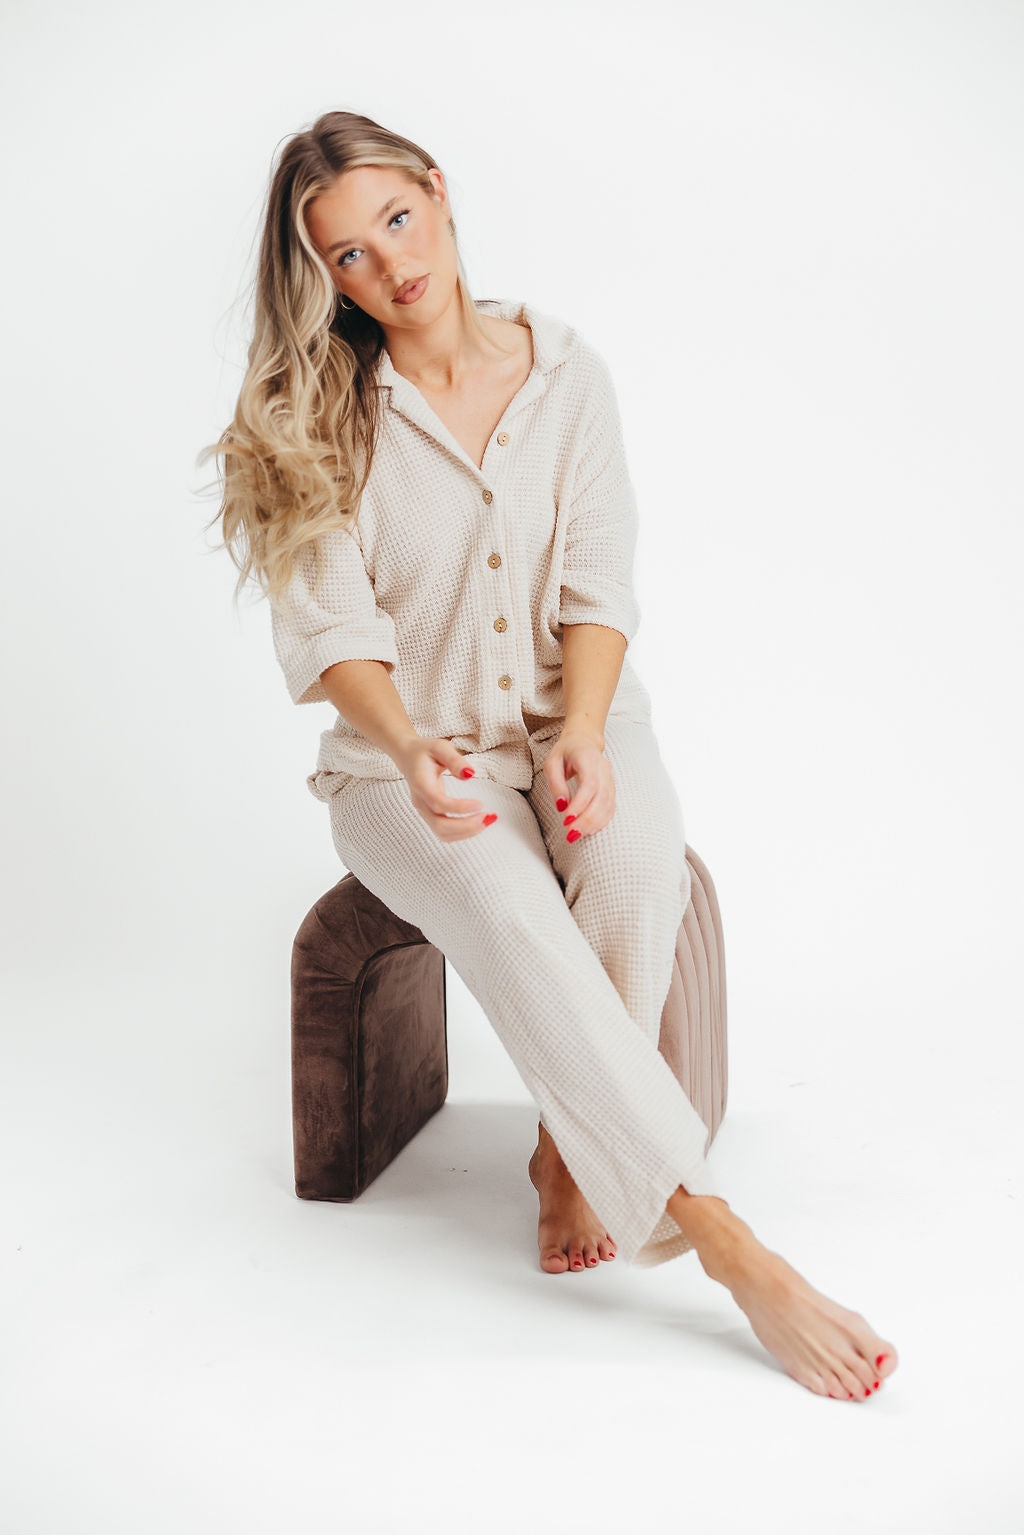 Ava Waffle Knit Pant and Button-Up Set in Cream - Nursing Friendly